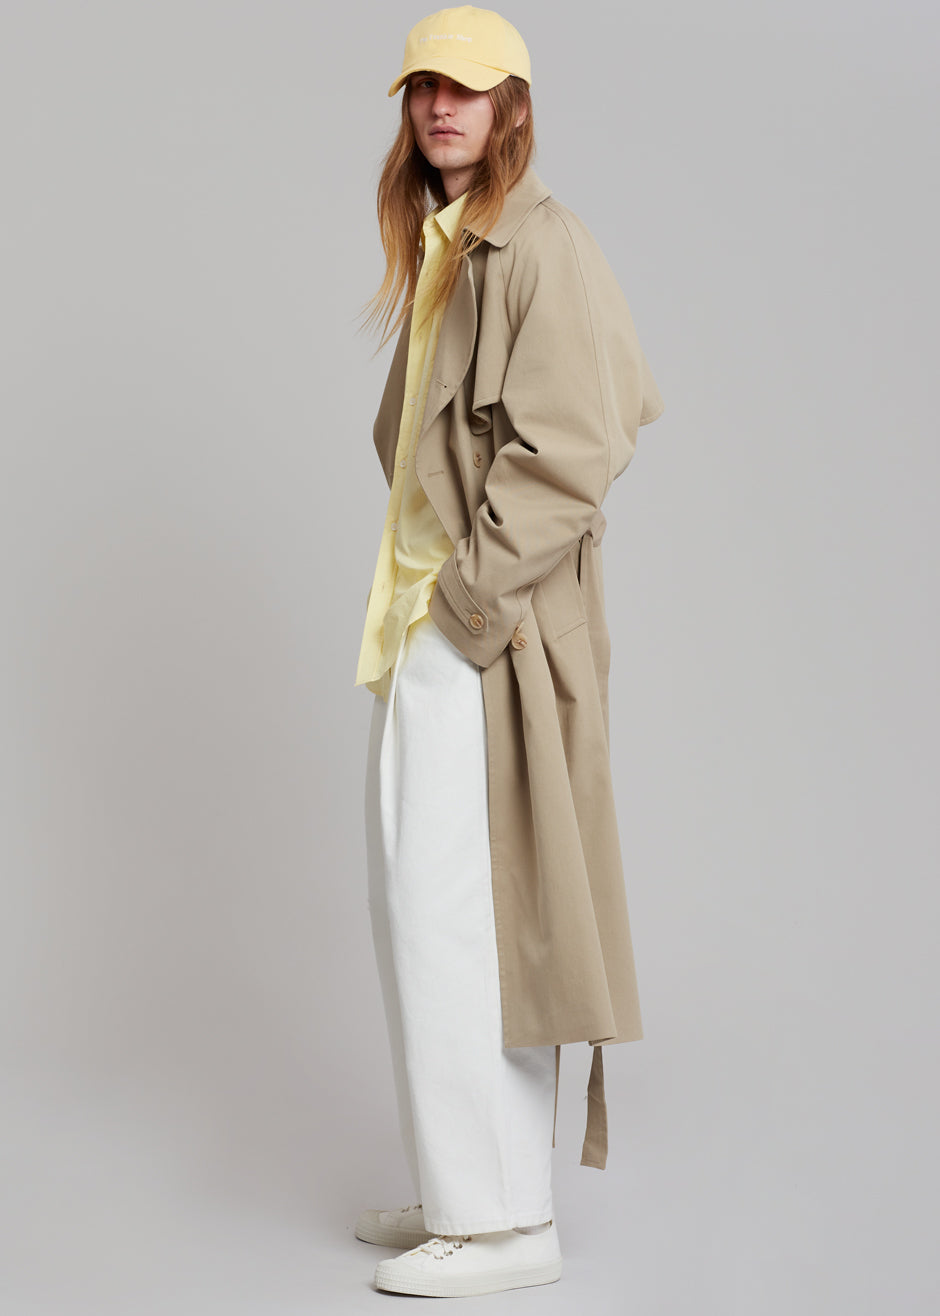 Umi Belted Trench Coat - Beige - 13